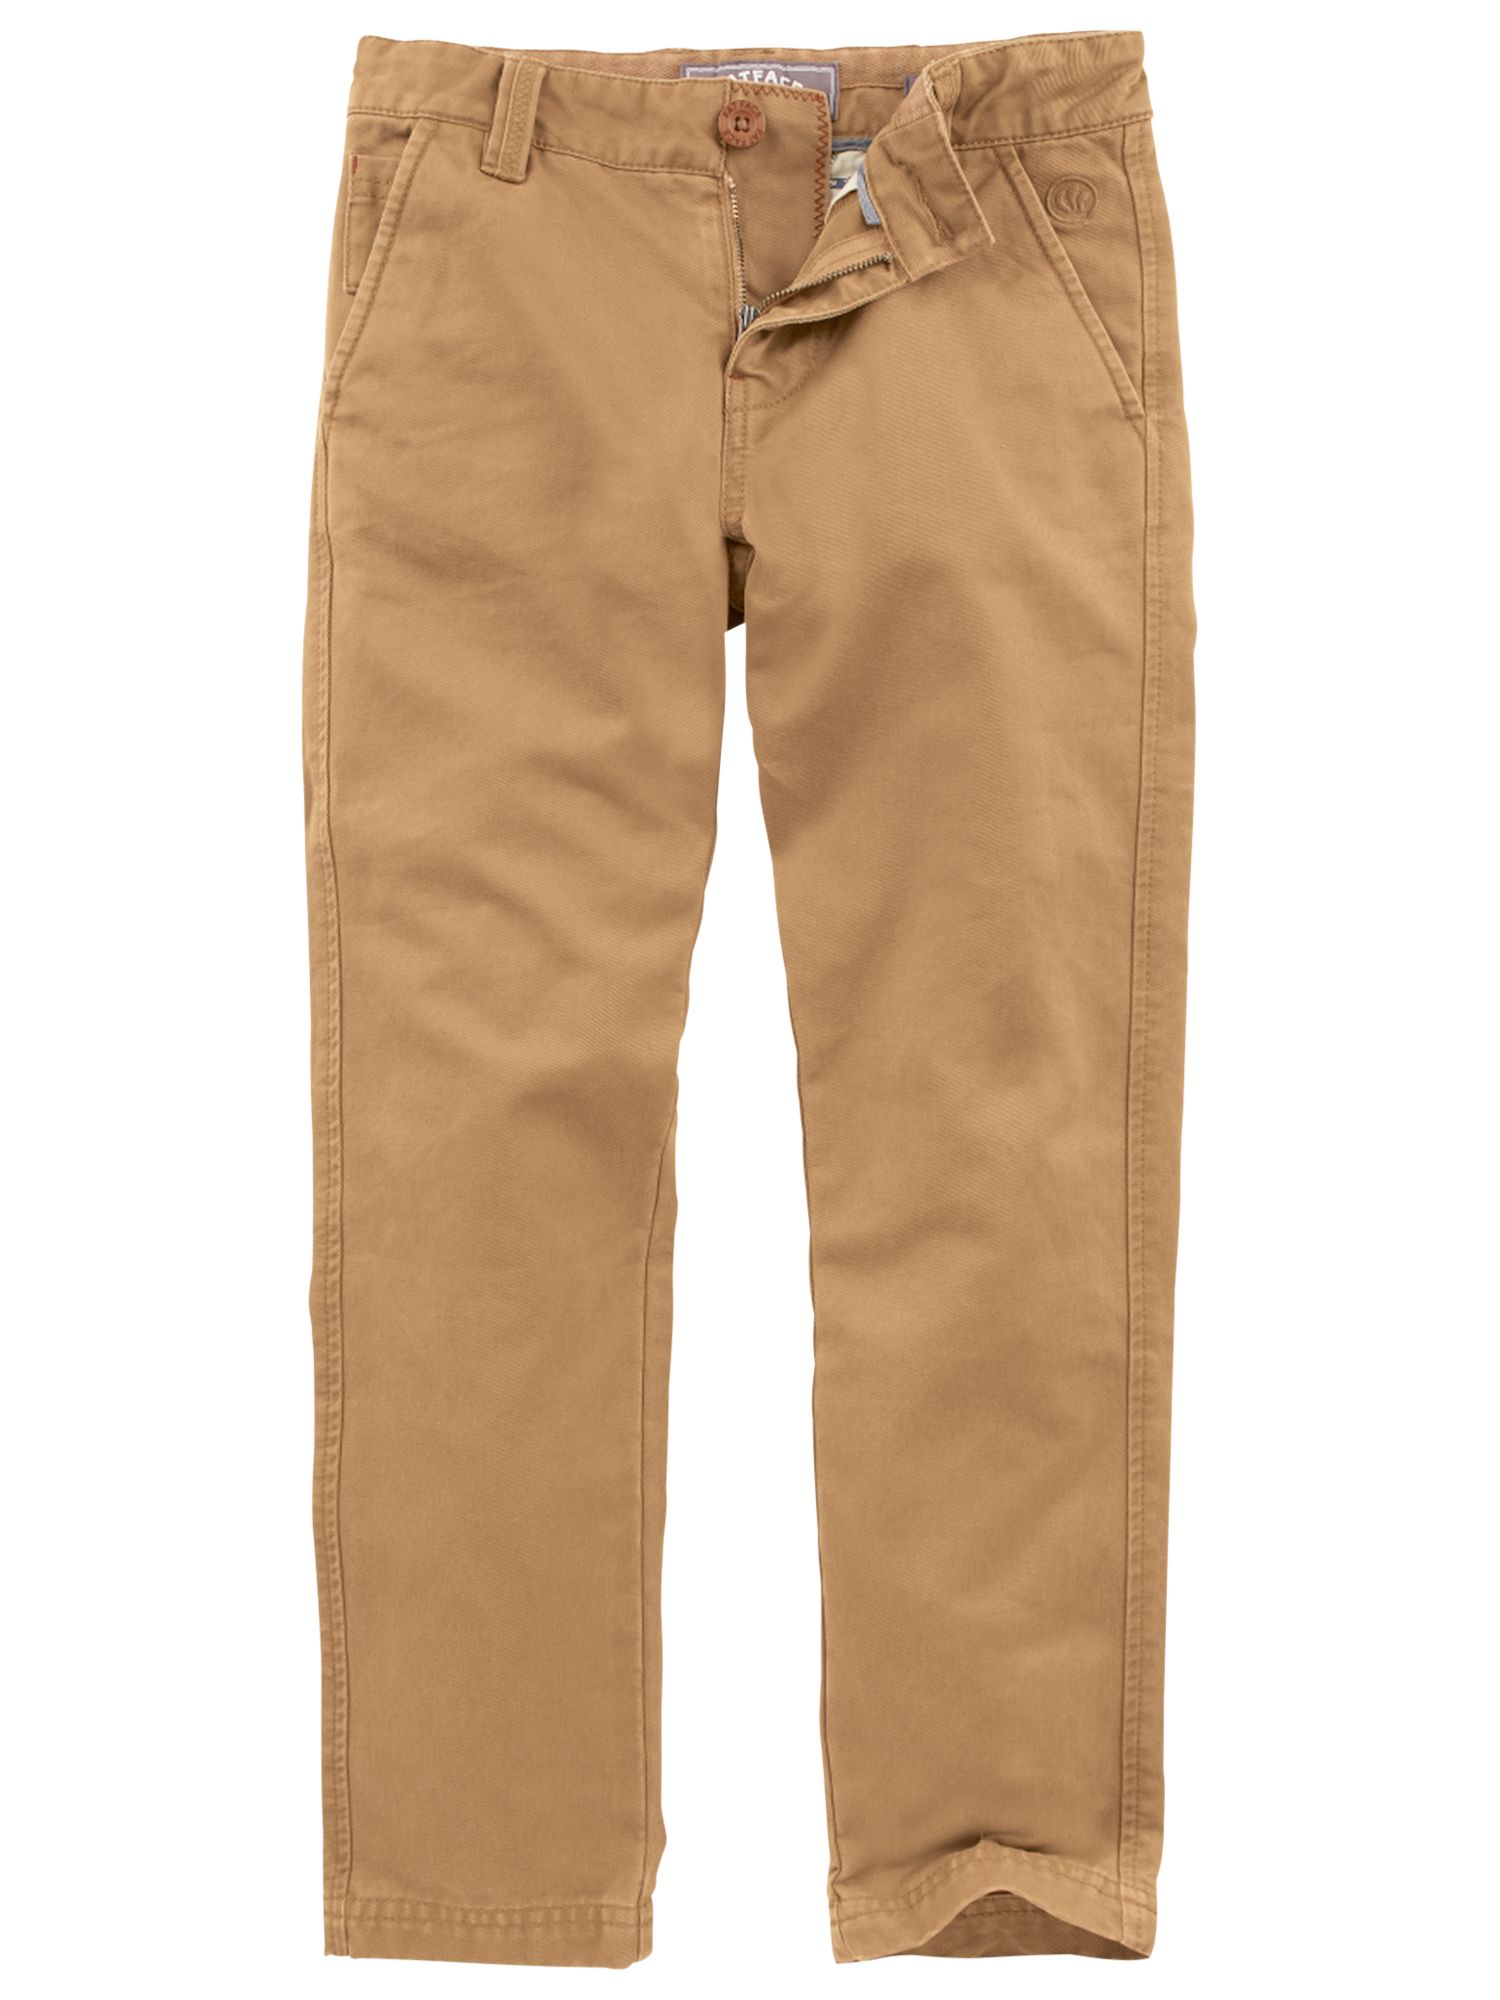 Fat Face Boys' Cowes Chinos, Yellow at John Lewis & Partners